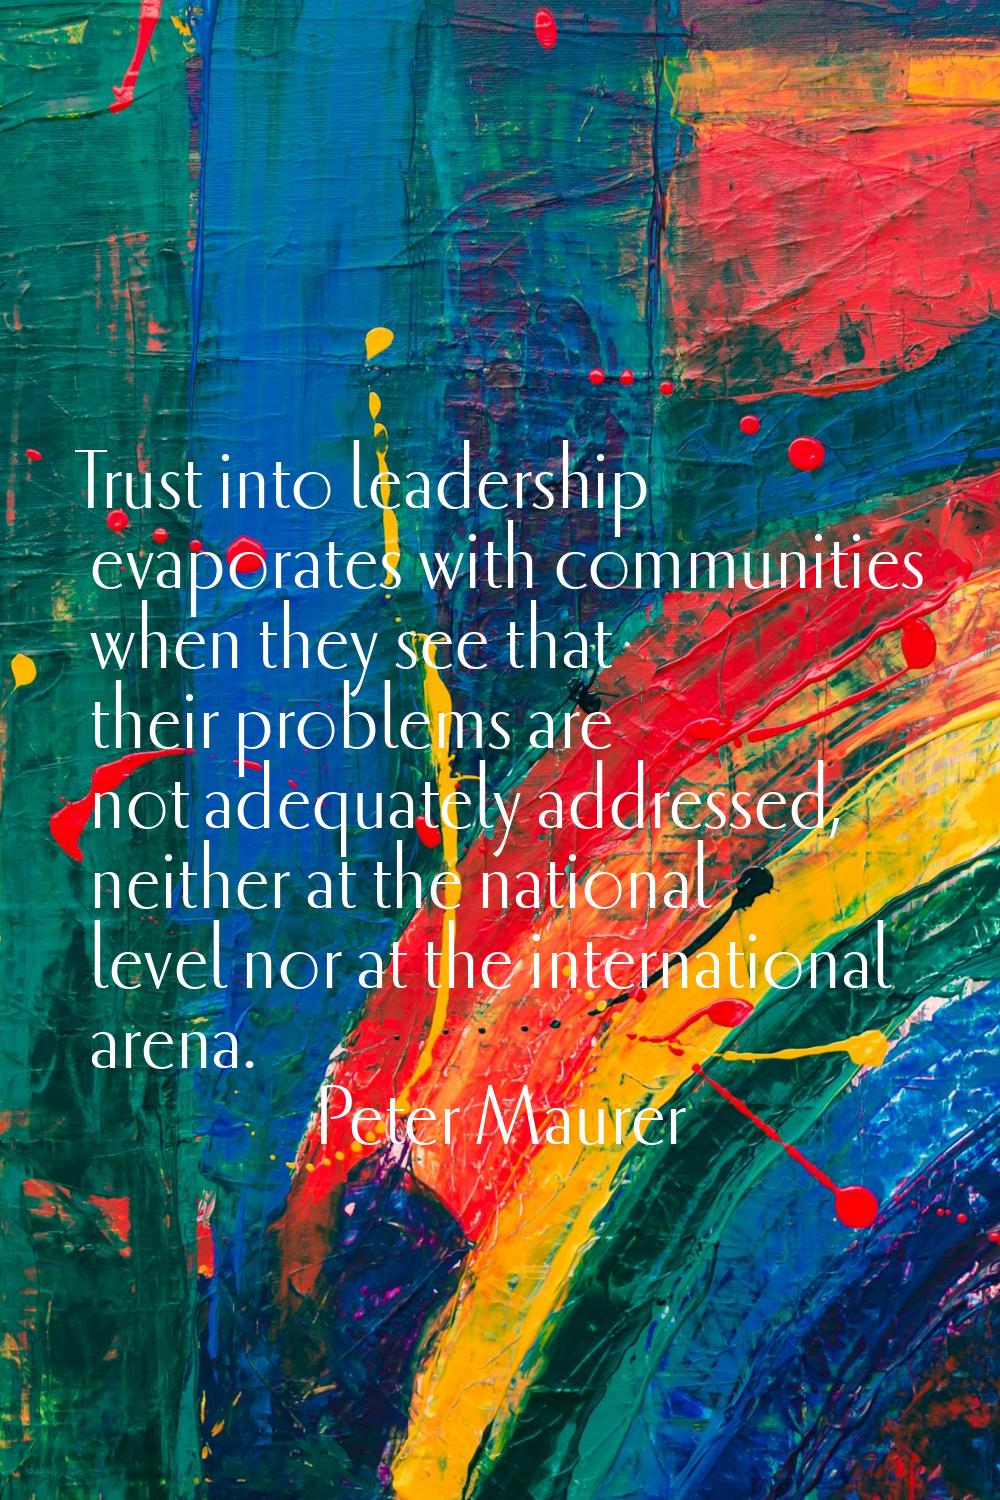 Trust into leadership evaporates with communities when they see that their problems are not adequat